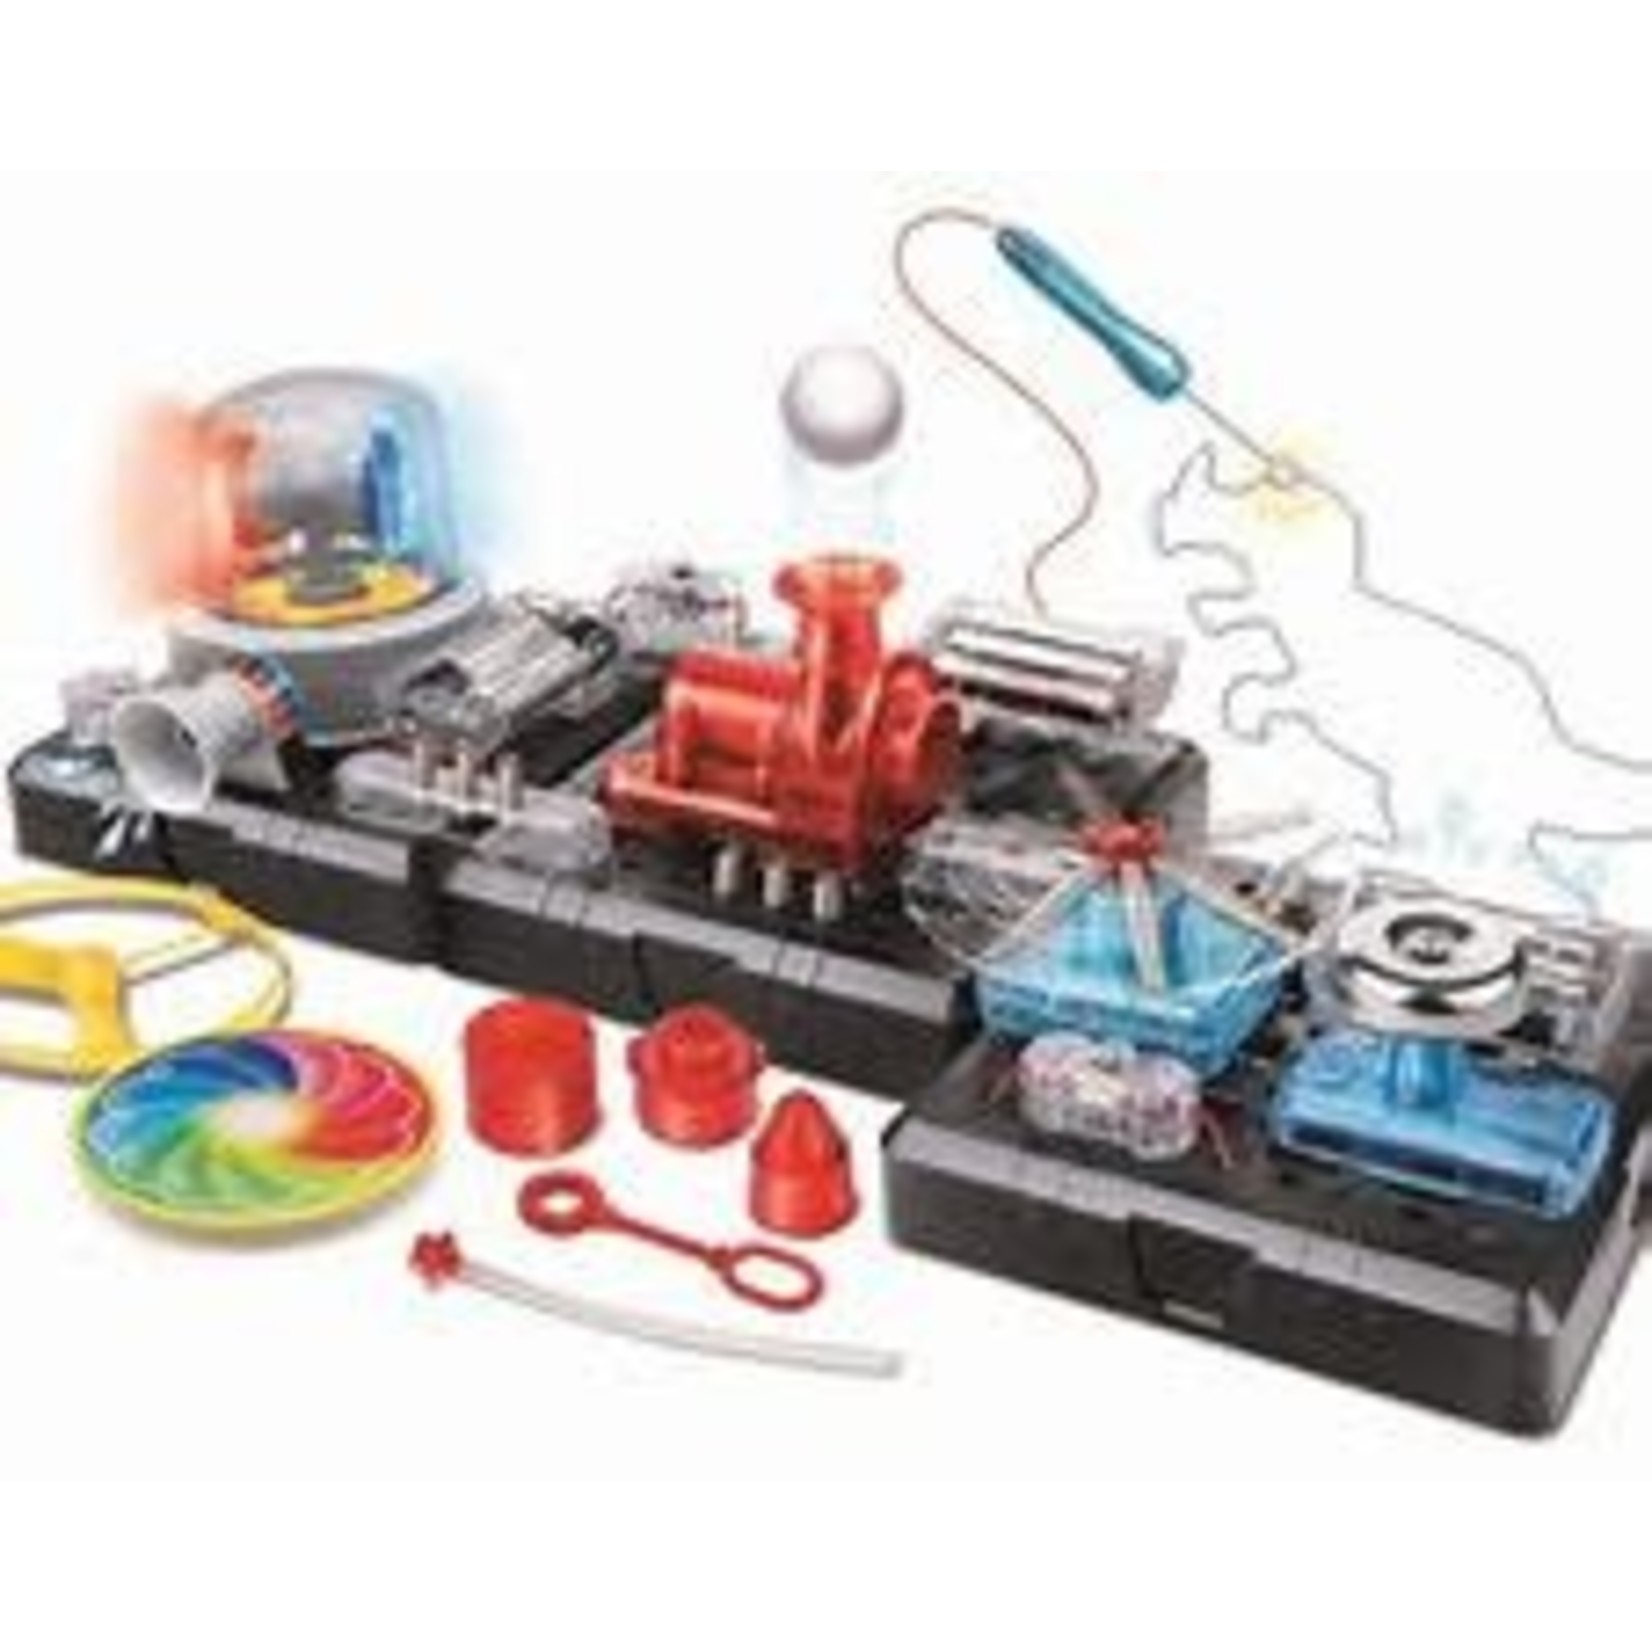 OwiKit RobotiKits: 100 in 1 Science Lab Experiments STEM Kit